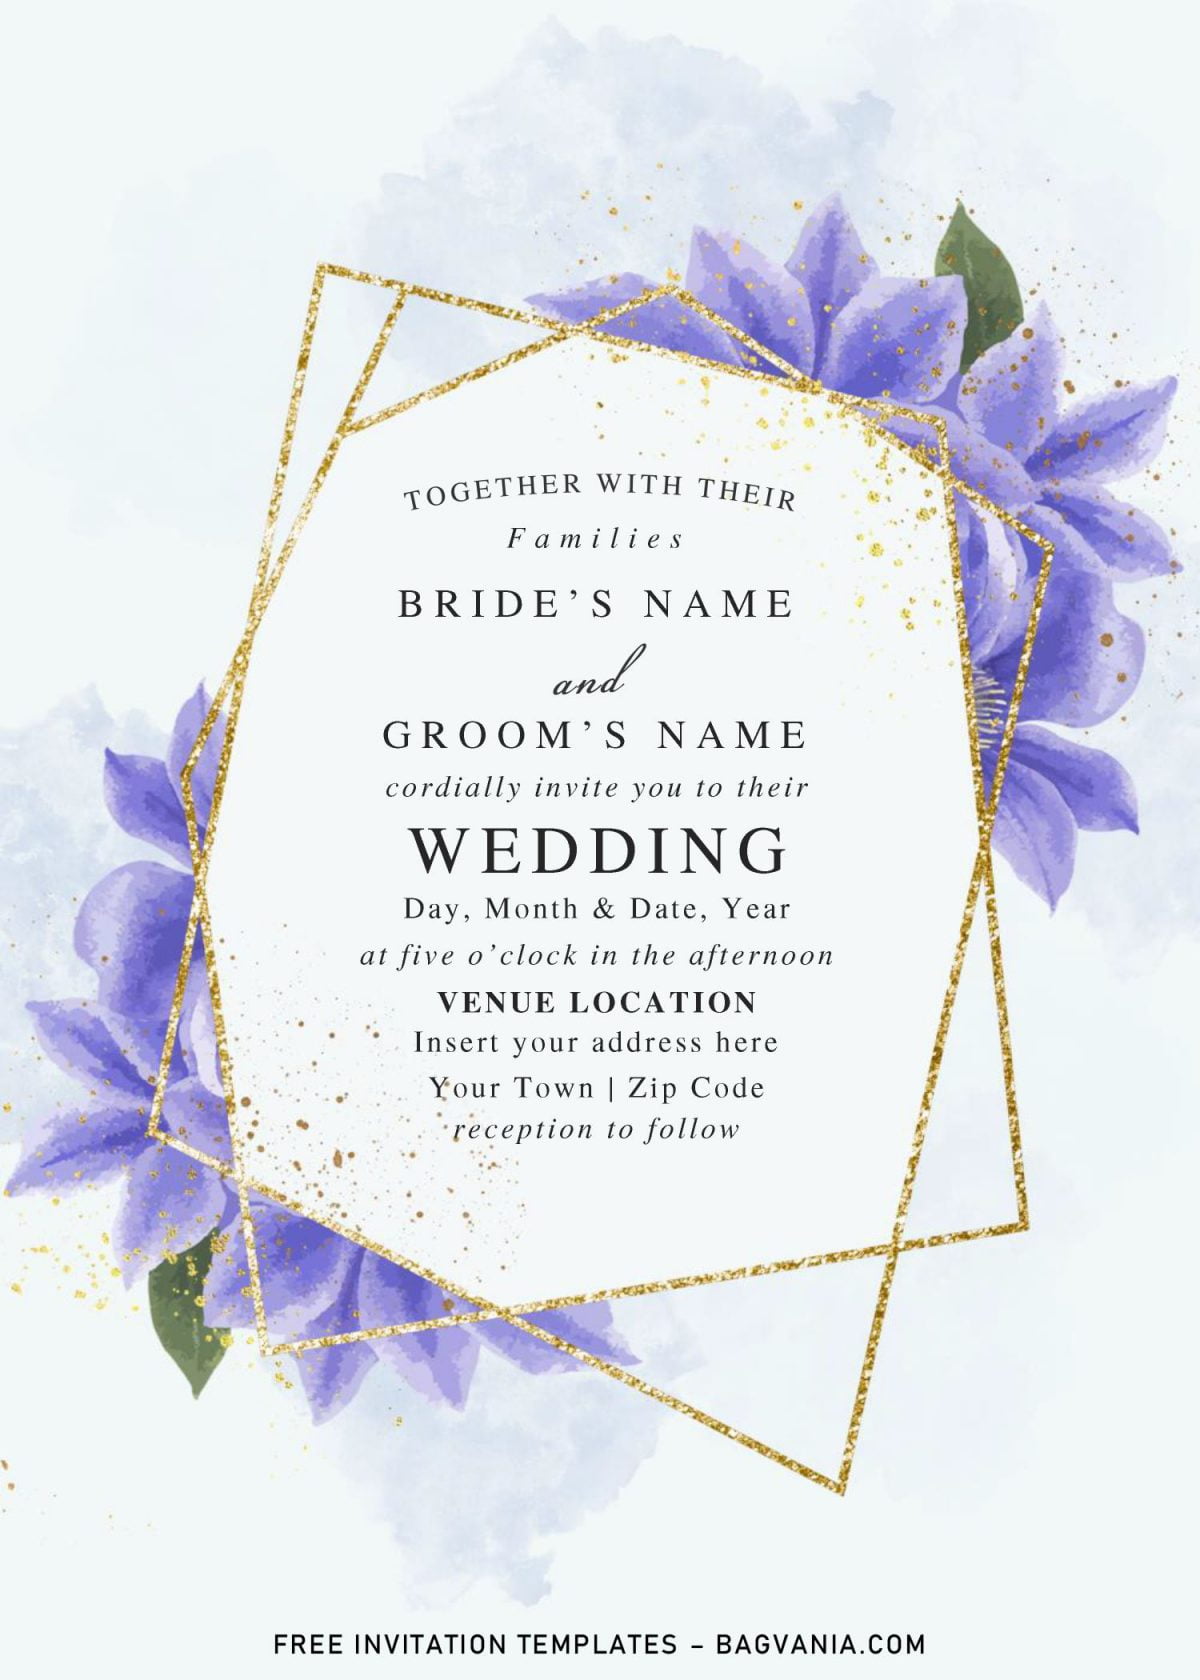 Free Blue Floral And Gold Geometric Wedding Invitation Templates For Word and has stunning gold glitter geometric pattern